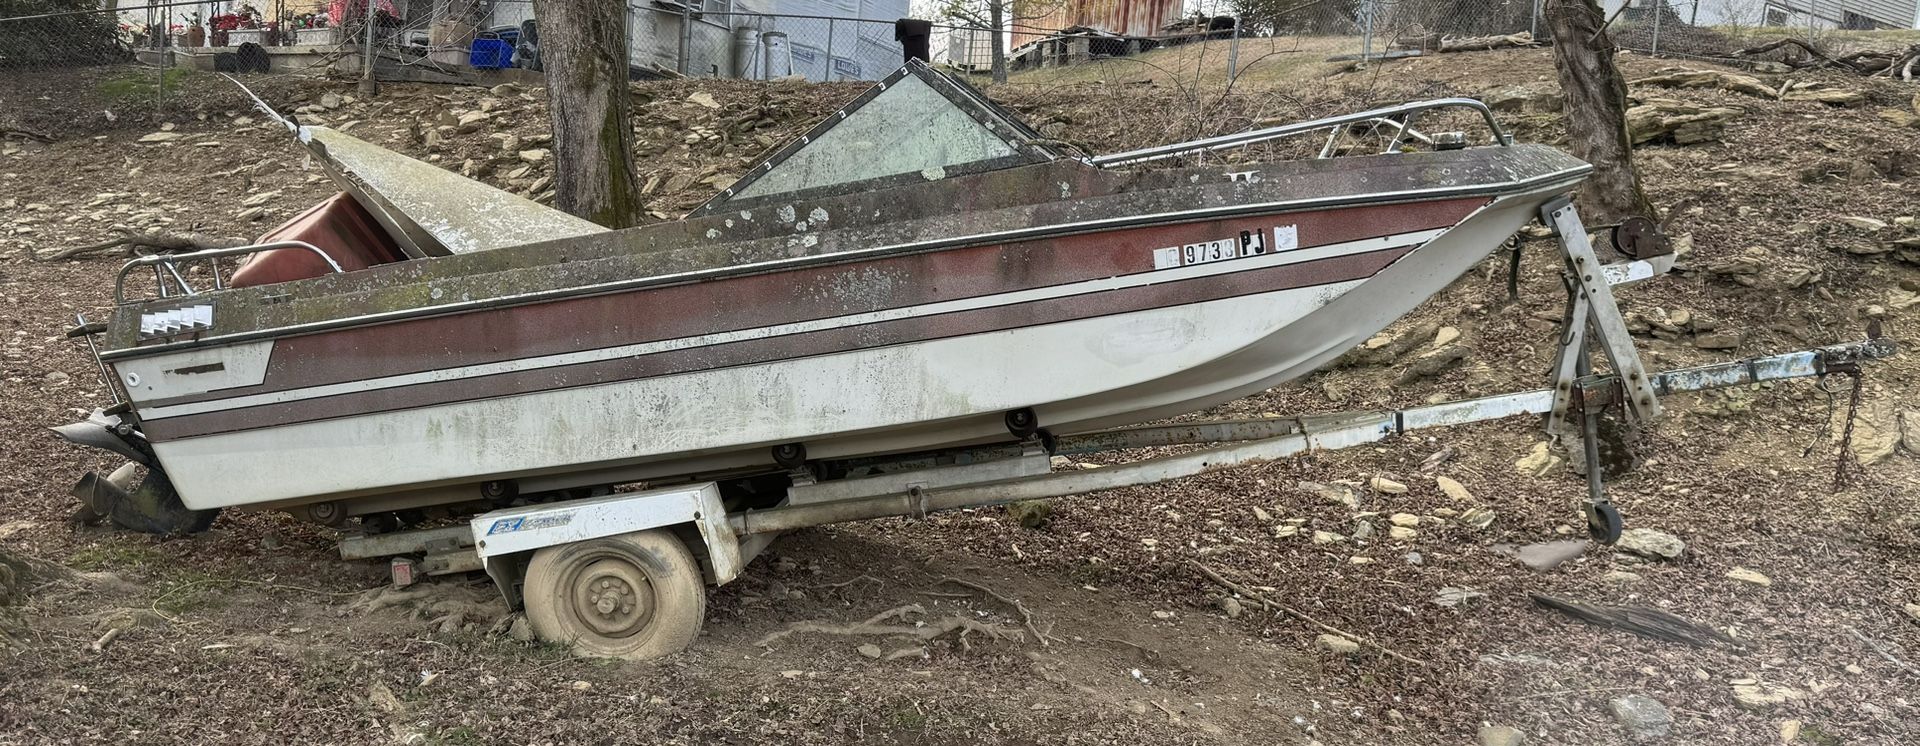 1977 Runabout Boat